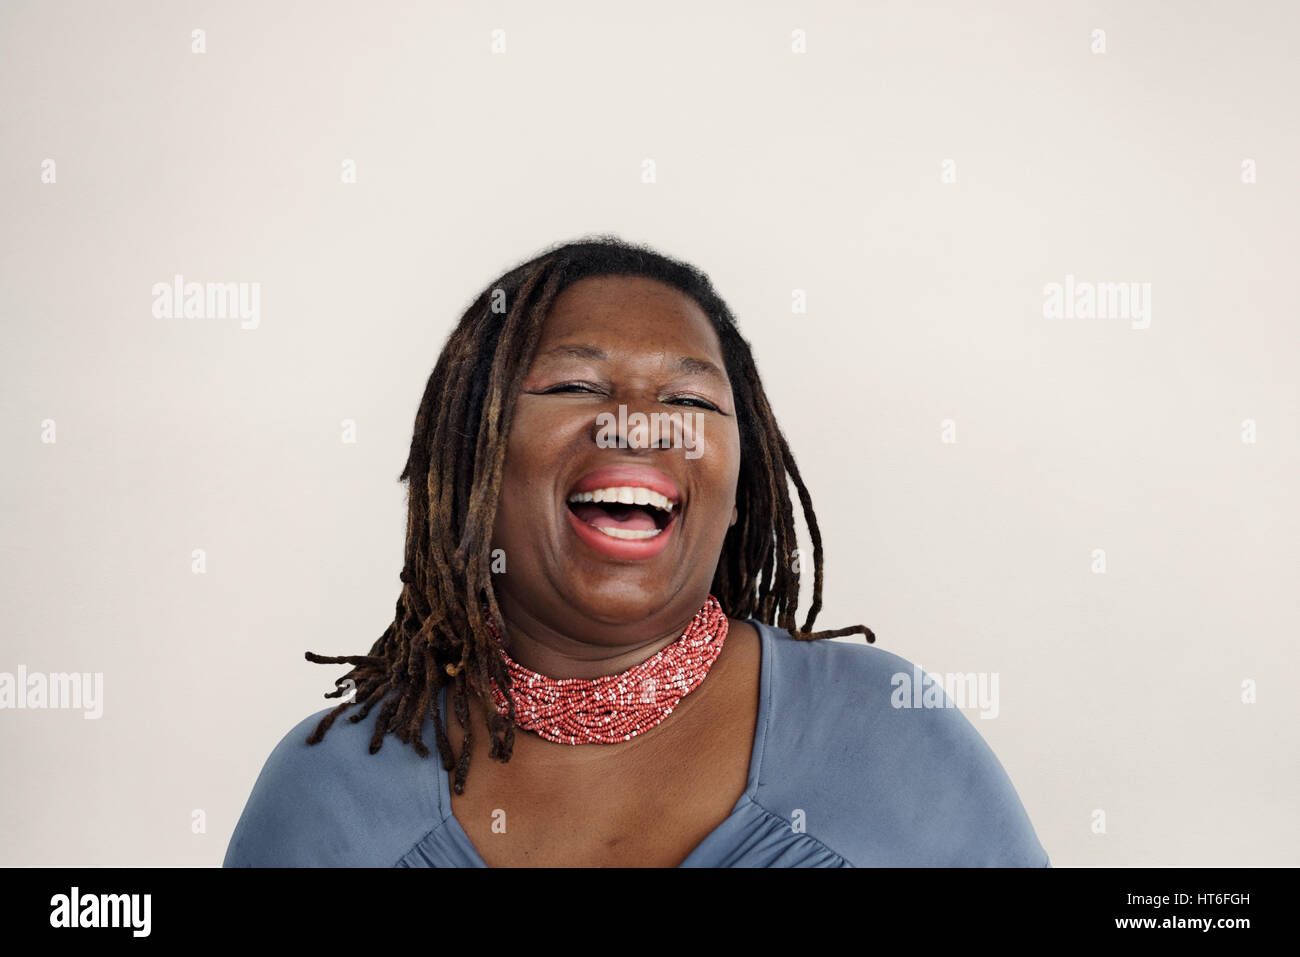 Woman Smiling Happiness Carefree Emotional Expression Concept Stock Photo